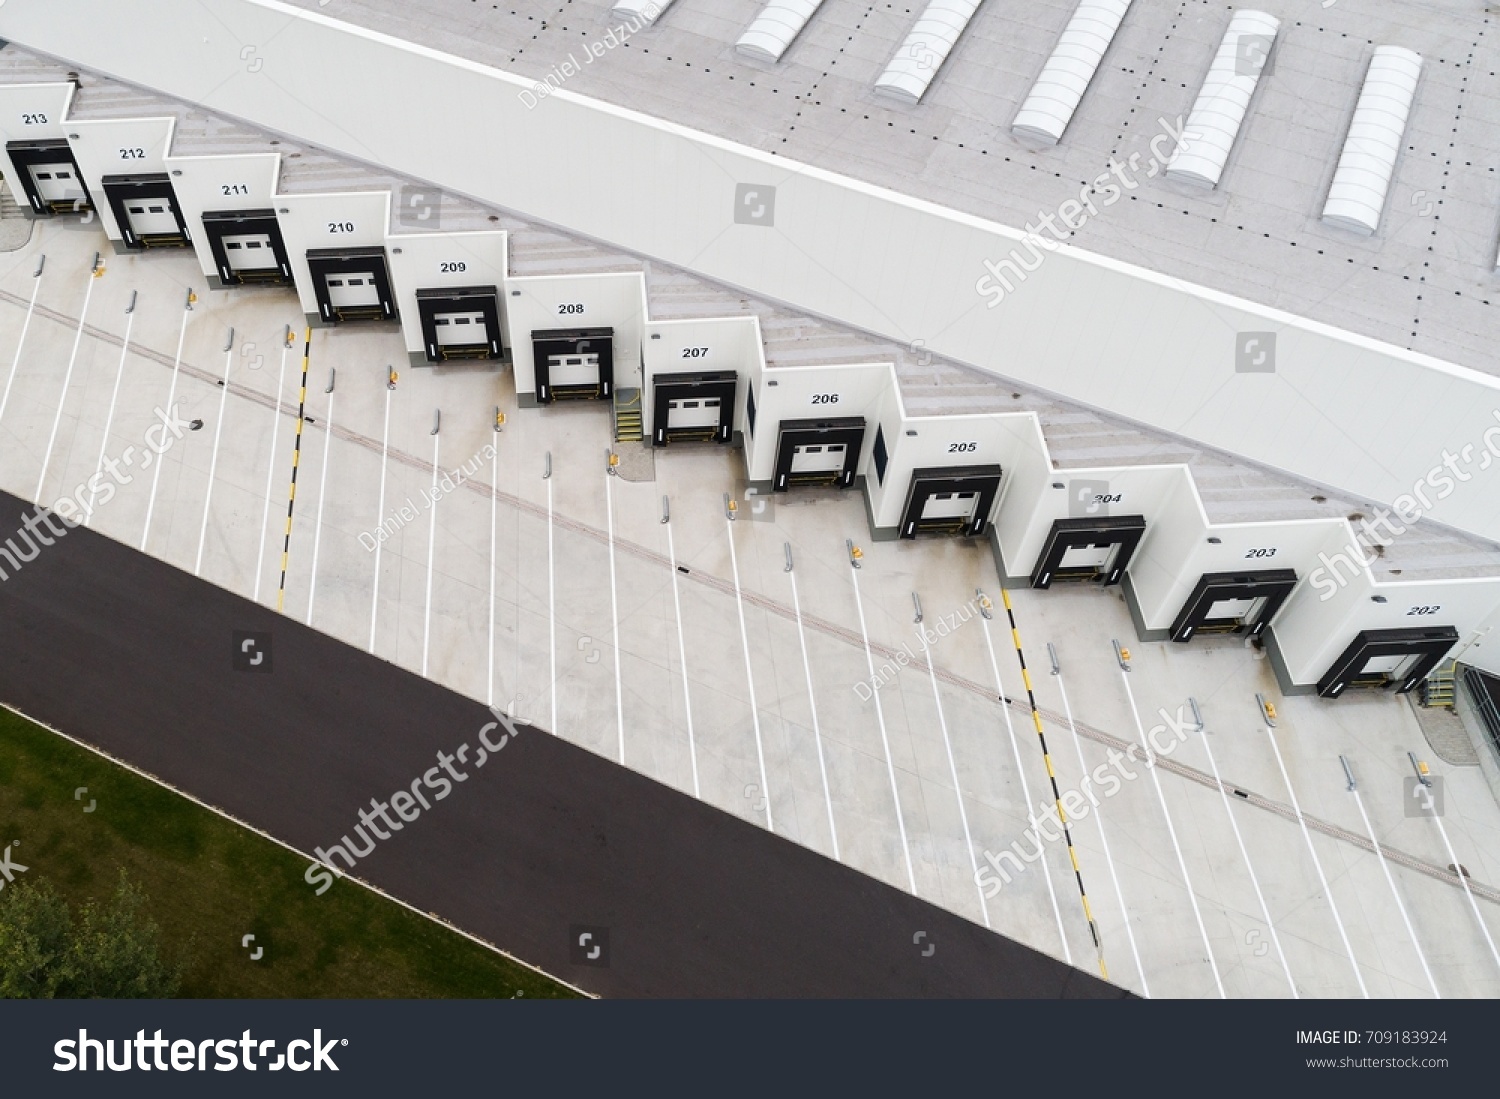 Aerial view on loading bays in distribution center #709183924